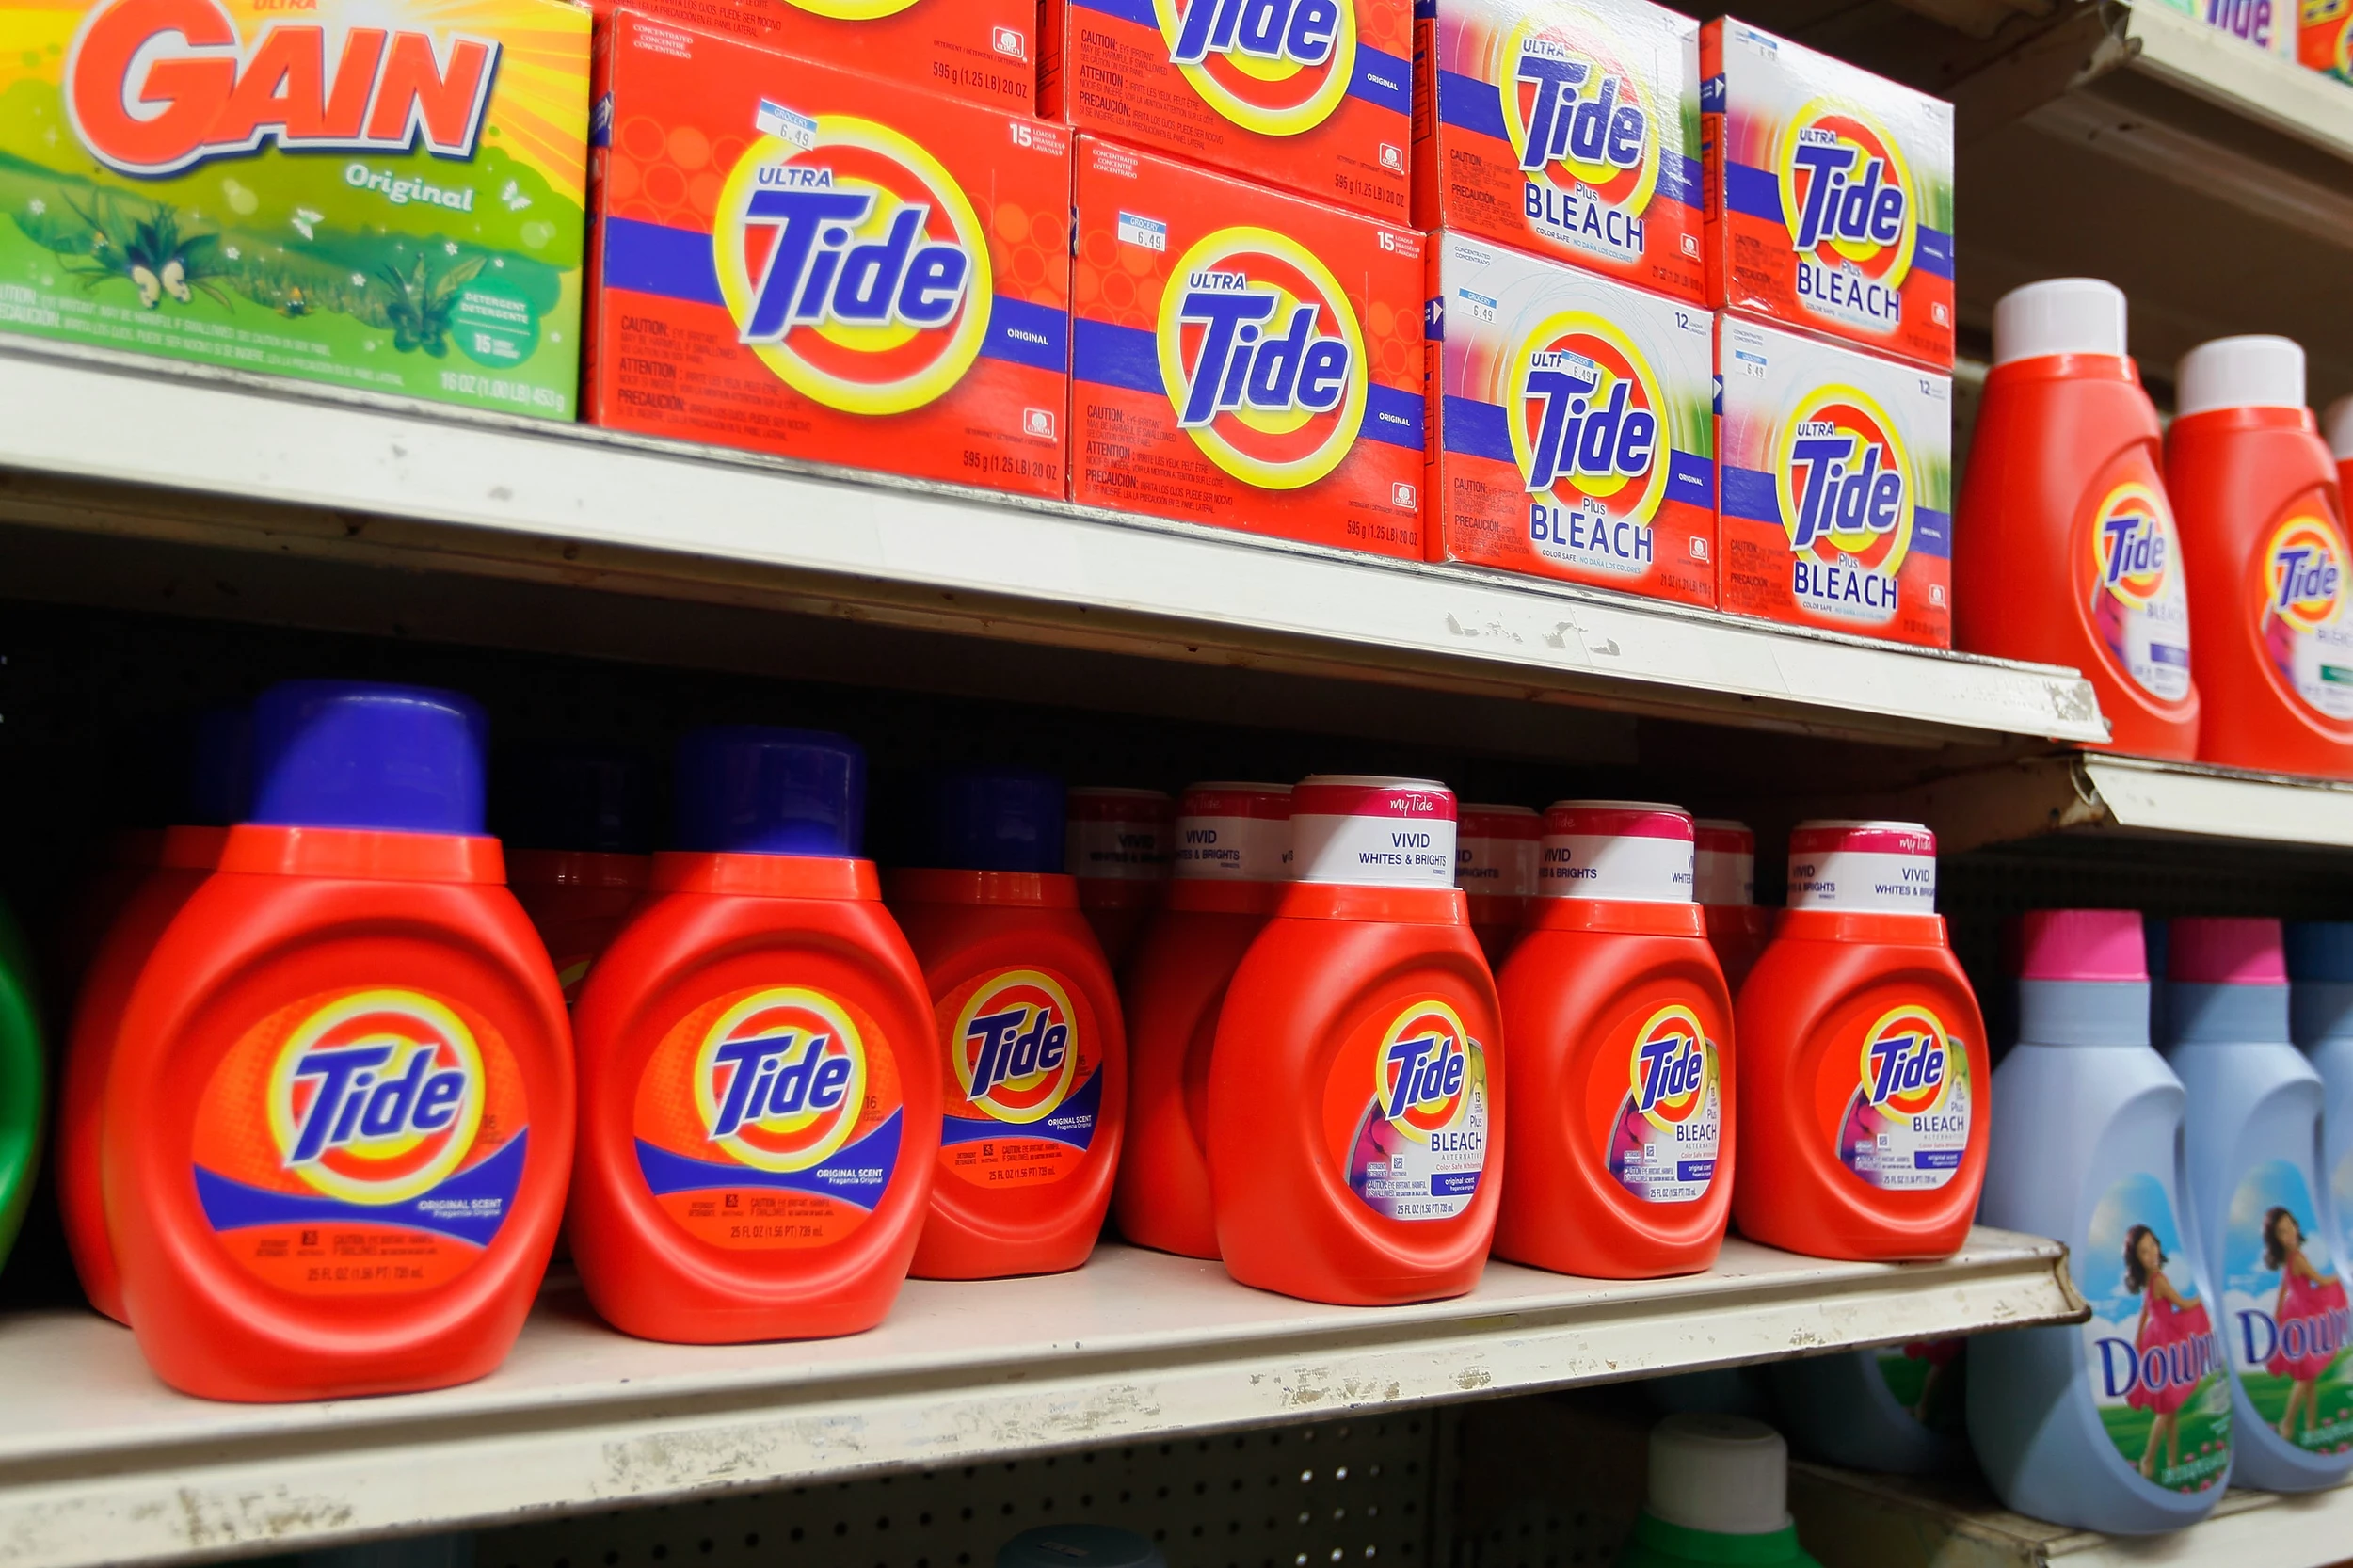 It's Now Illegal in NY to Sell Many Popular Laundry Detergents